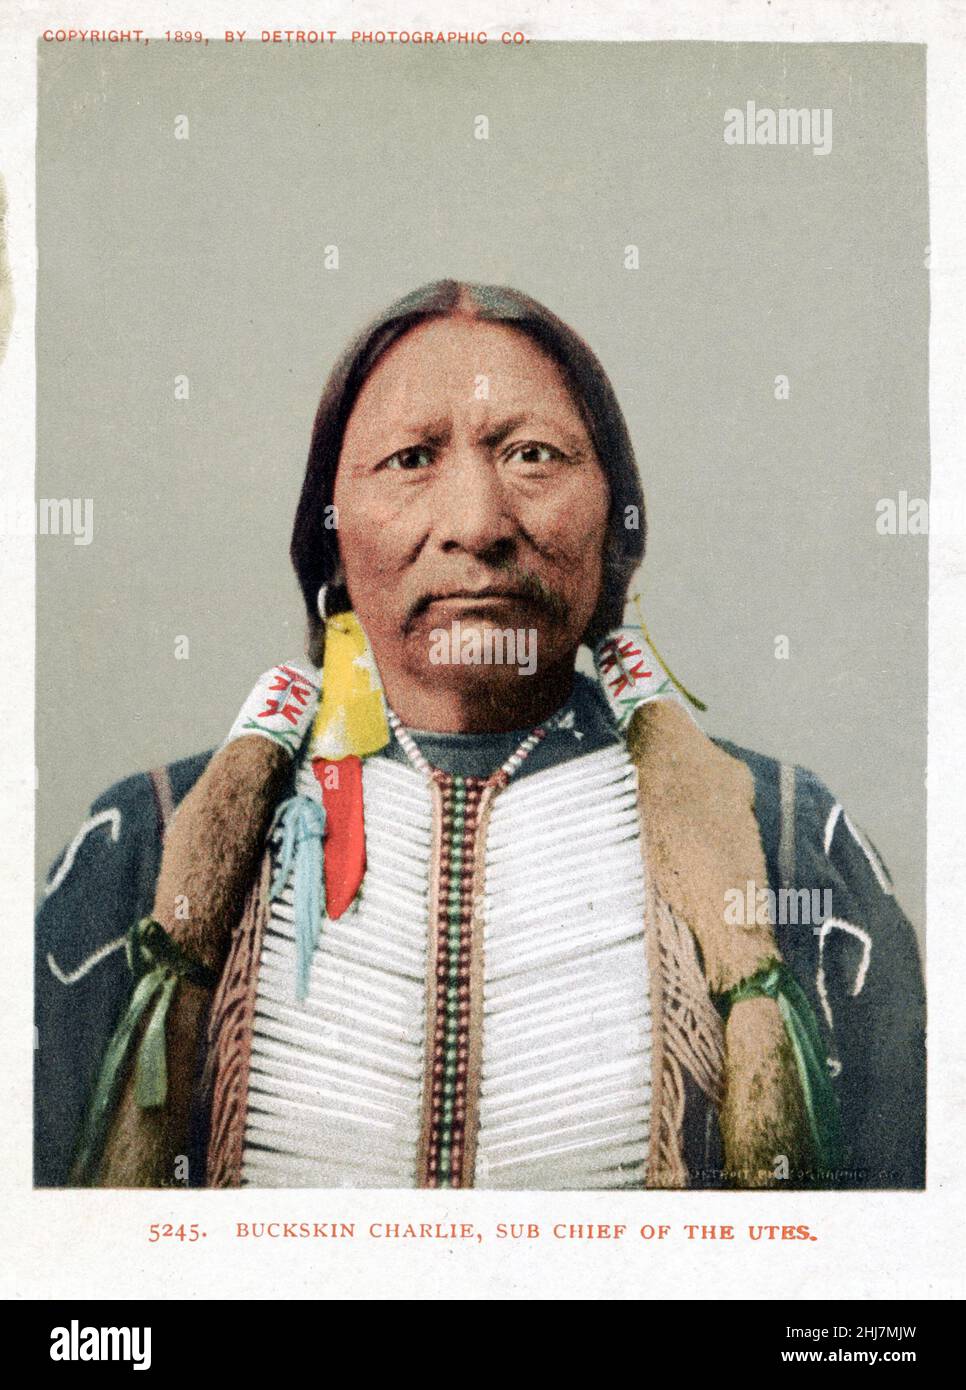 Antique and vintage photo - Native american / Indian / American Indian Buckskin Charlie, sub chief of the Utes. Detroit Photographic Co., 1899. Stock Photo